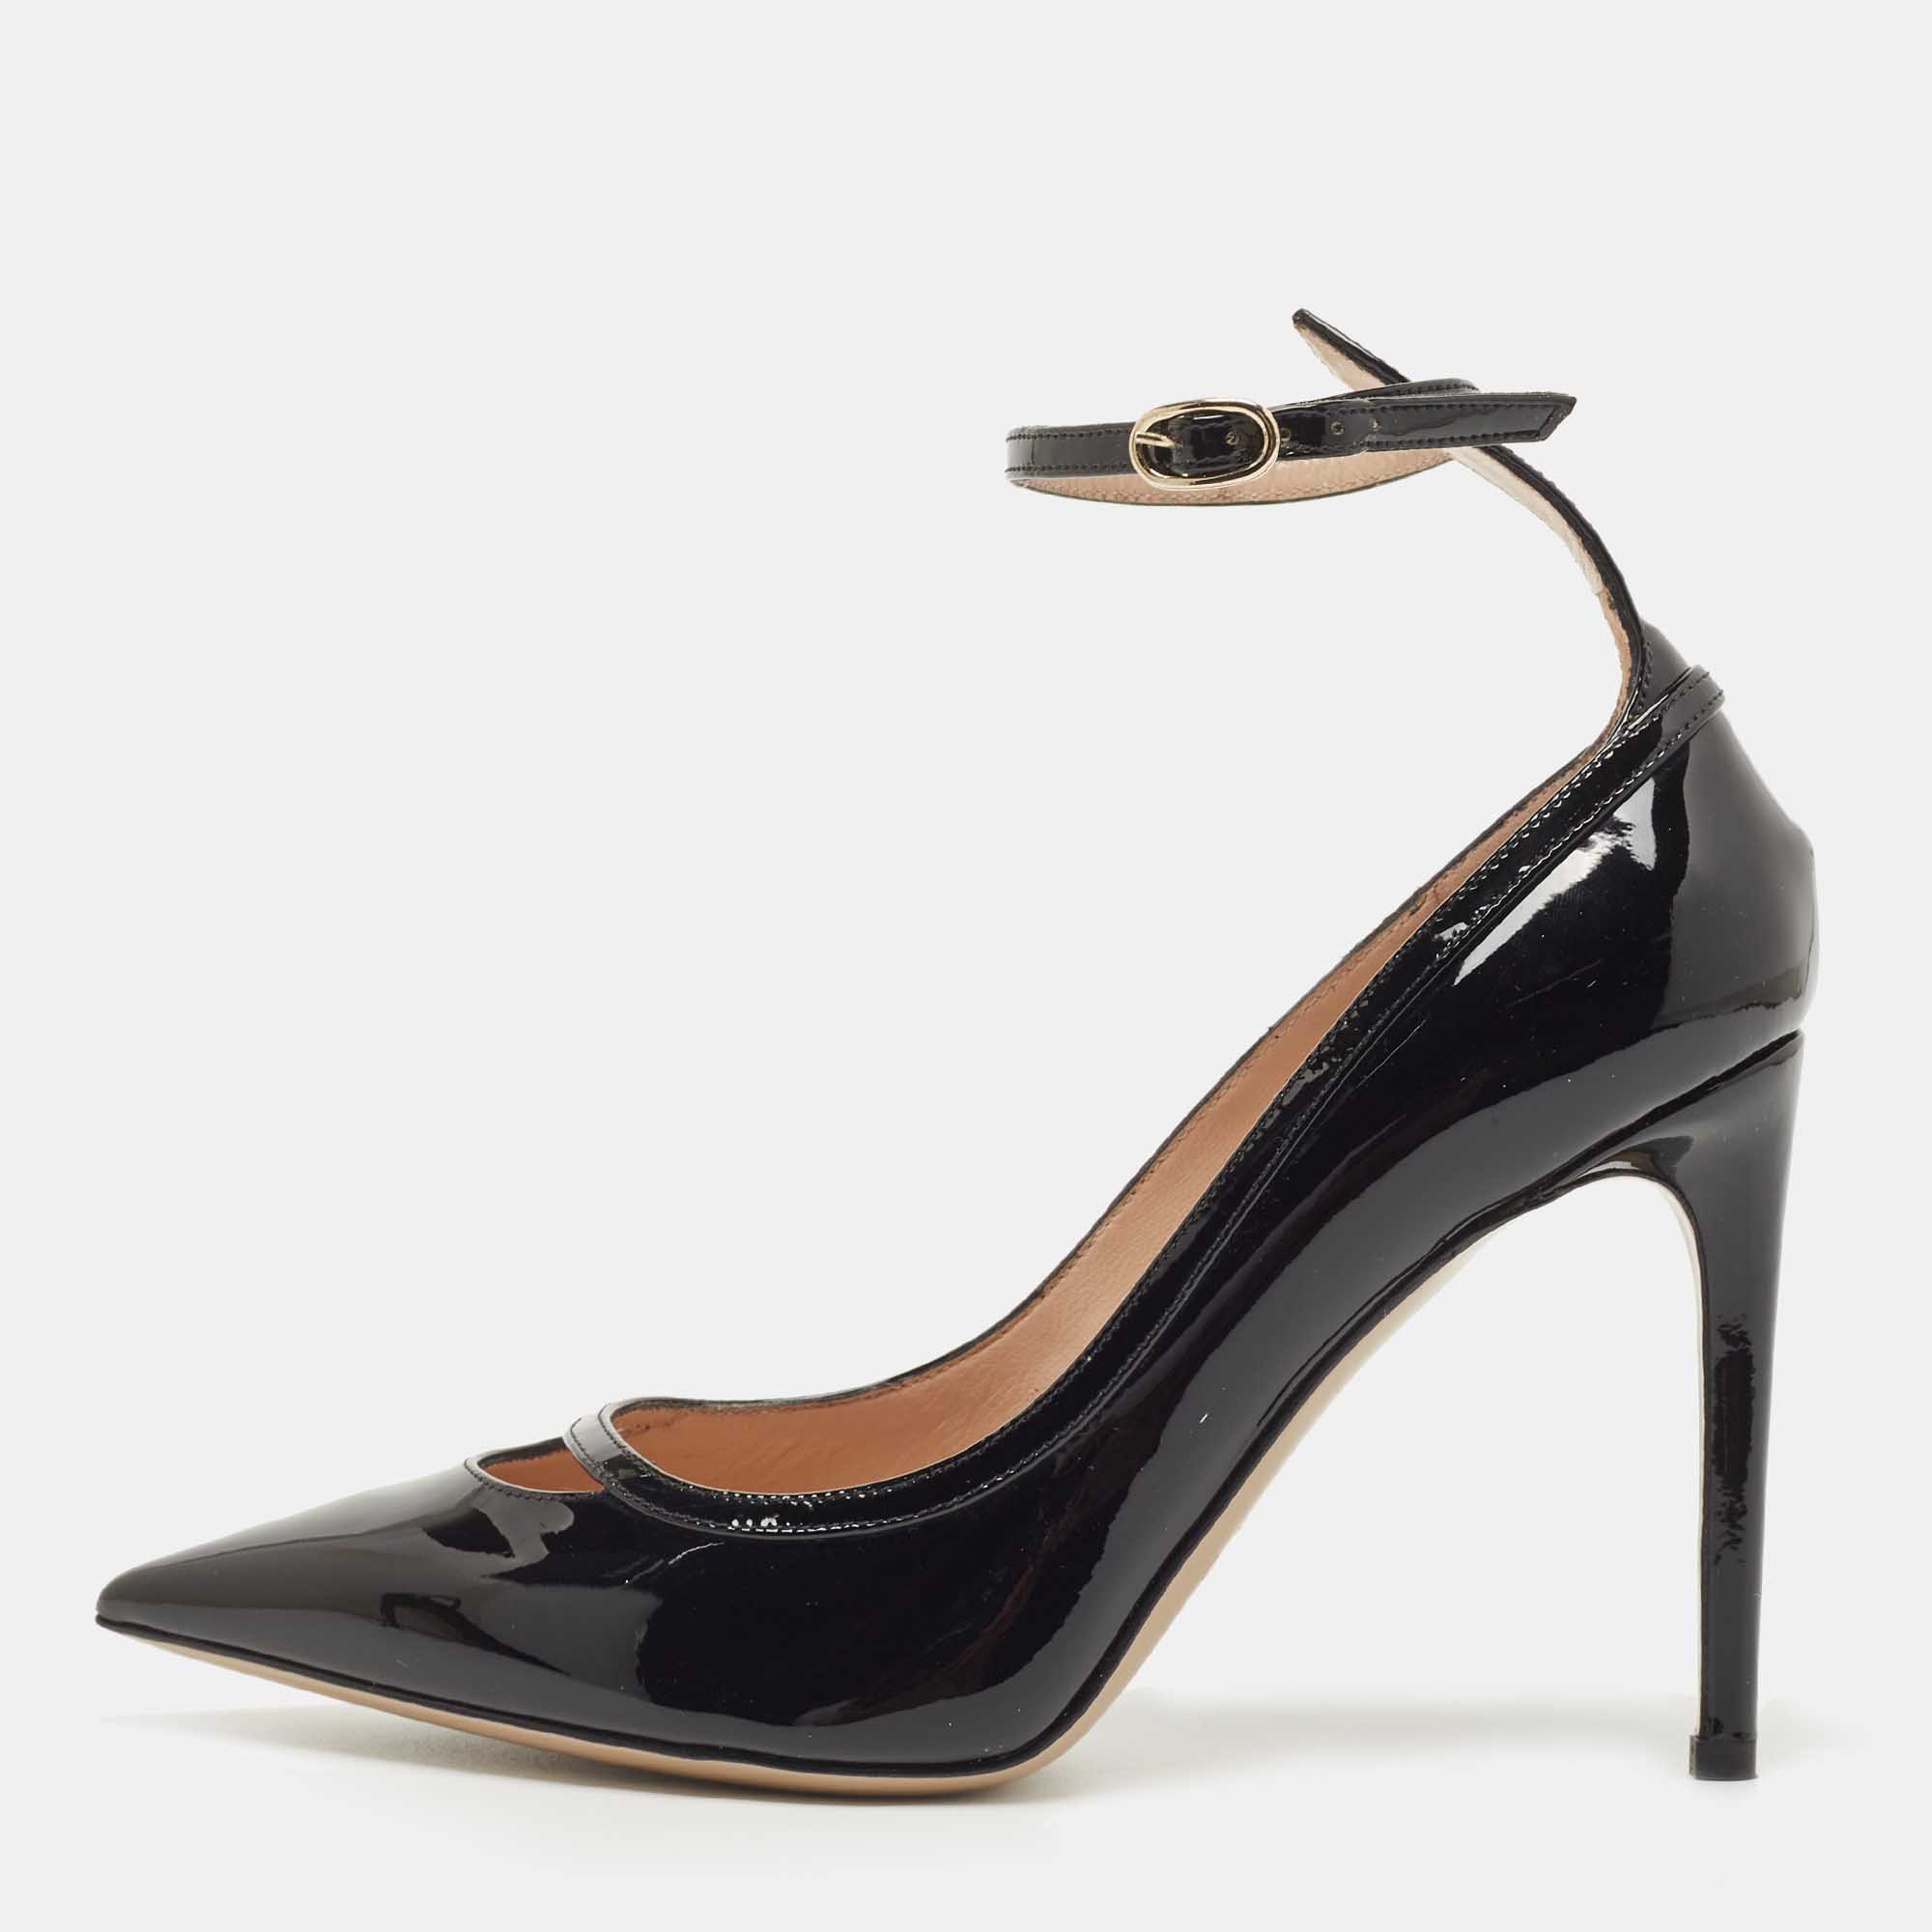 Pre-owned Valentino Garavani Black Patent Leather Ankle Cuff Pointed Toe Pumps Size 37